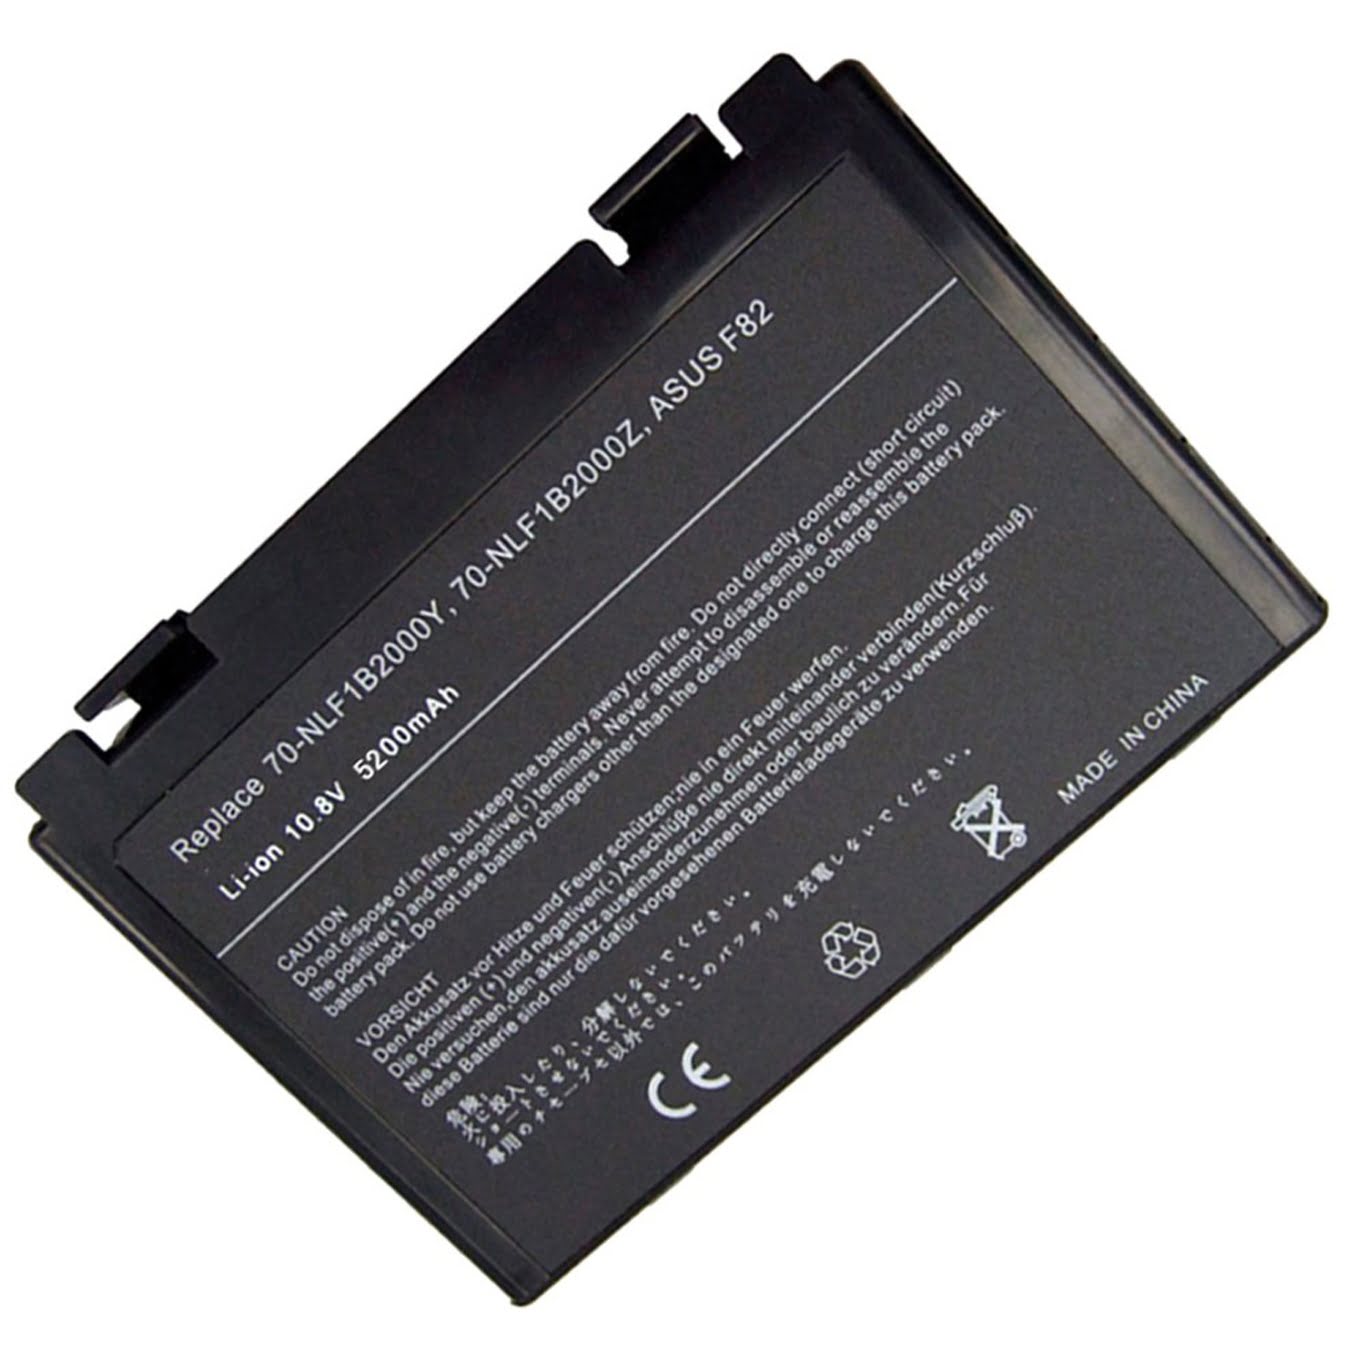 Asus 07gg016ap1875, 70nlf1b2000y Laptop Battery For A41, A41i replacement